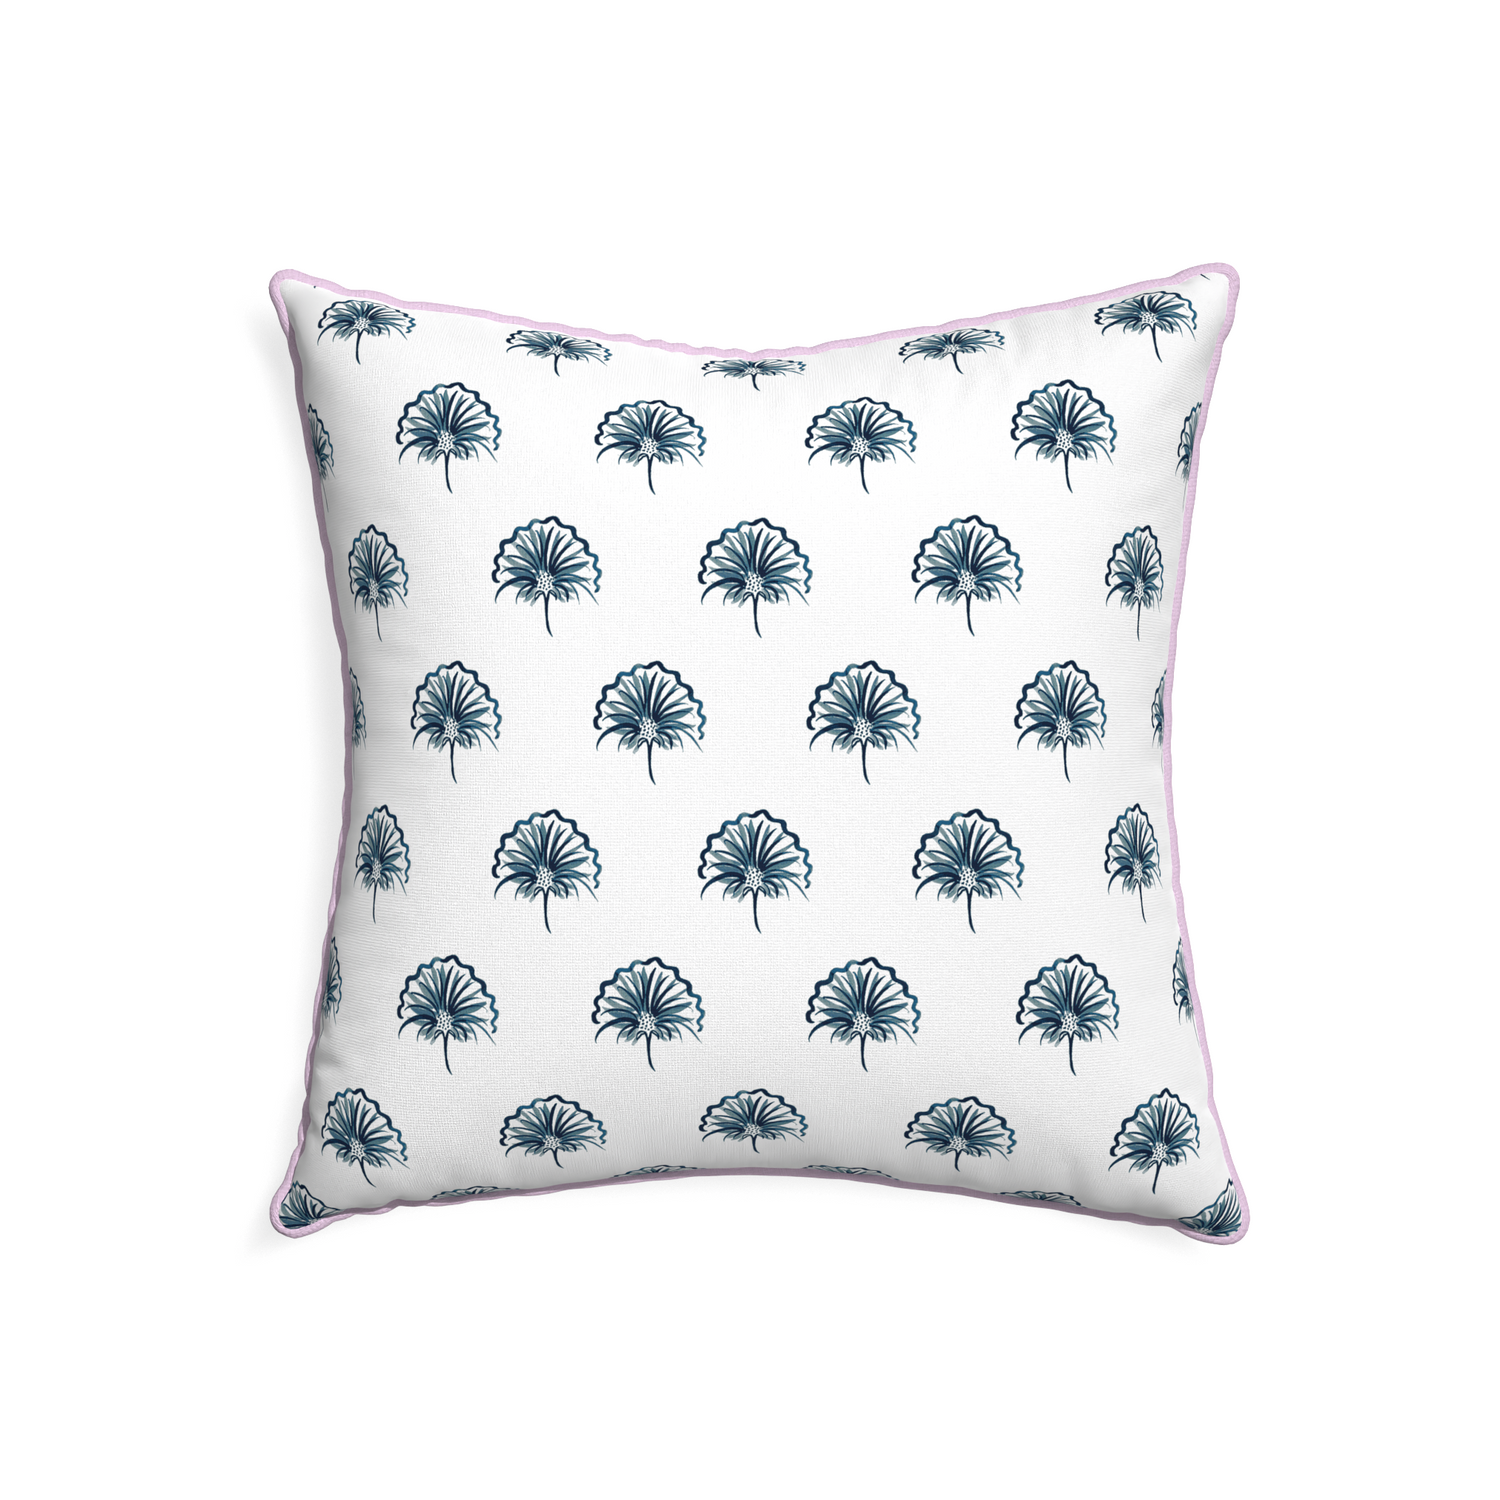 22-square penelope midnight custom floral navypillow with l piping on white background